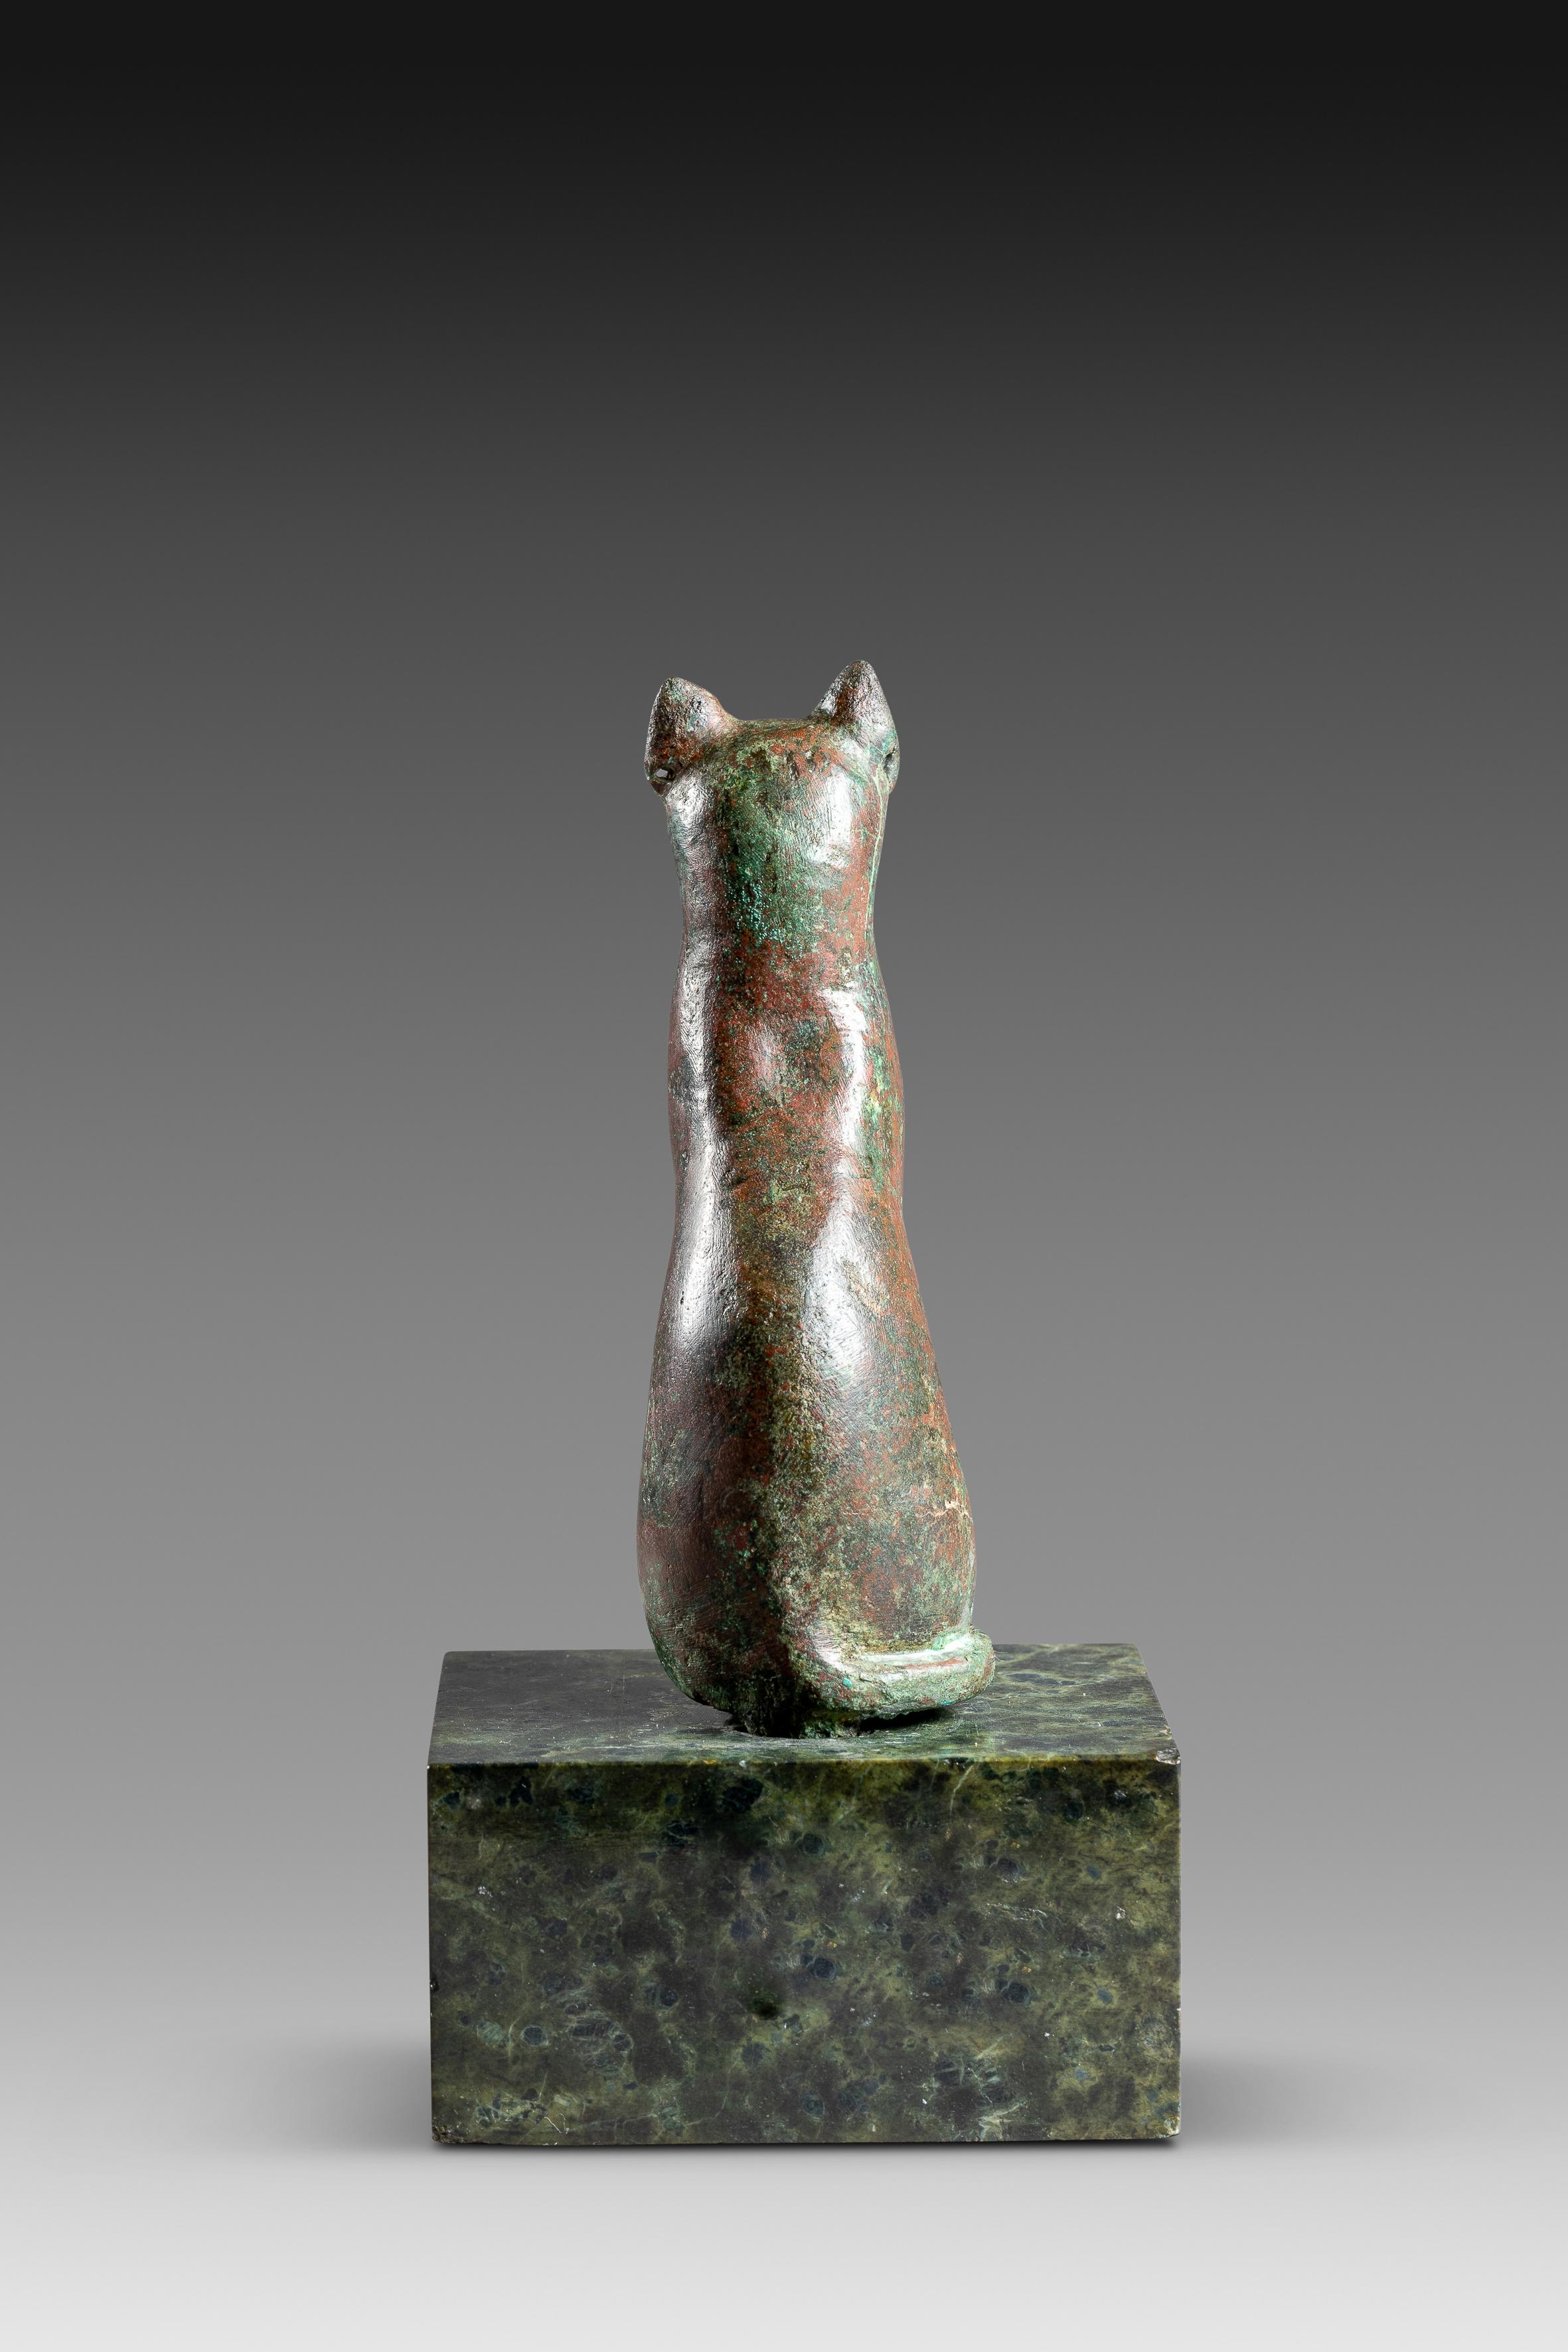 Bronze Bastet figurine, Egypt, late period '664–332 BCE' this small green and red covered bronze figurine dating from the Late Period (664–332 BCE) represents the Egyptian goddess Bast or Bastet as a sitting cat. On the left ear one can notice a